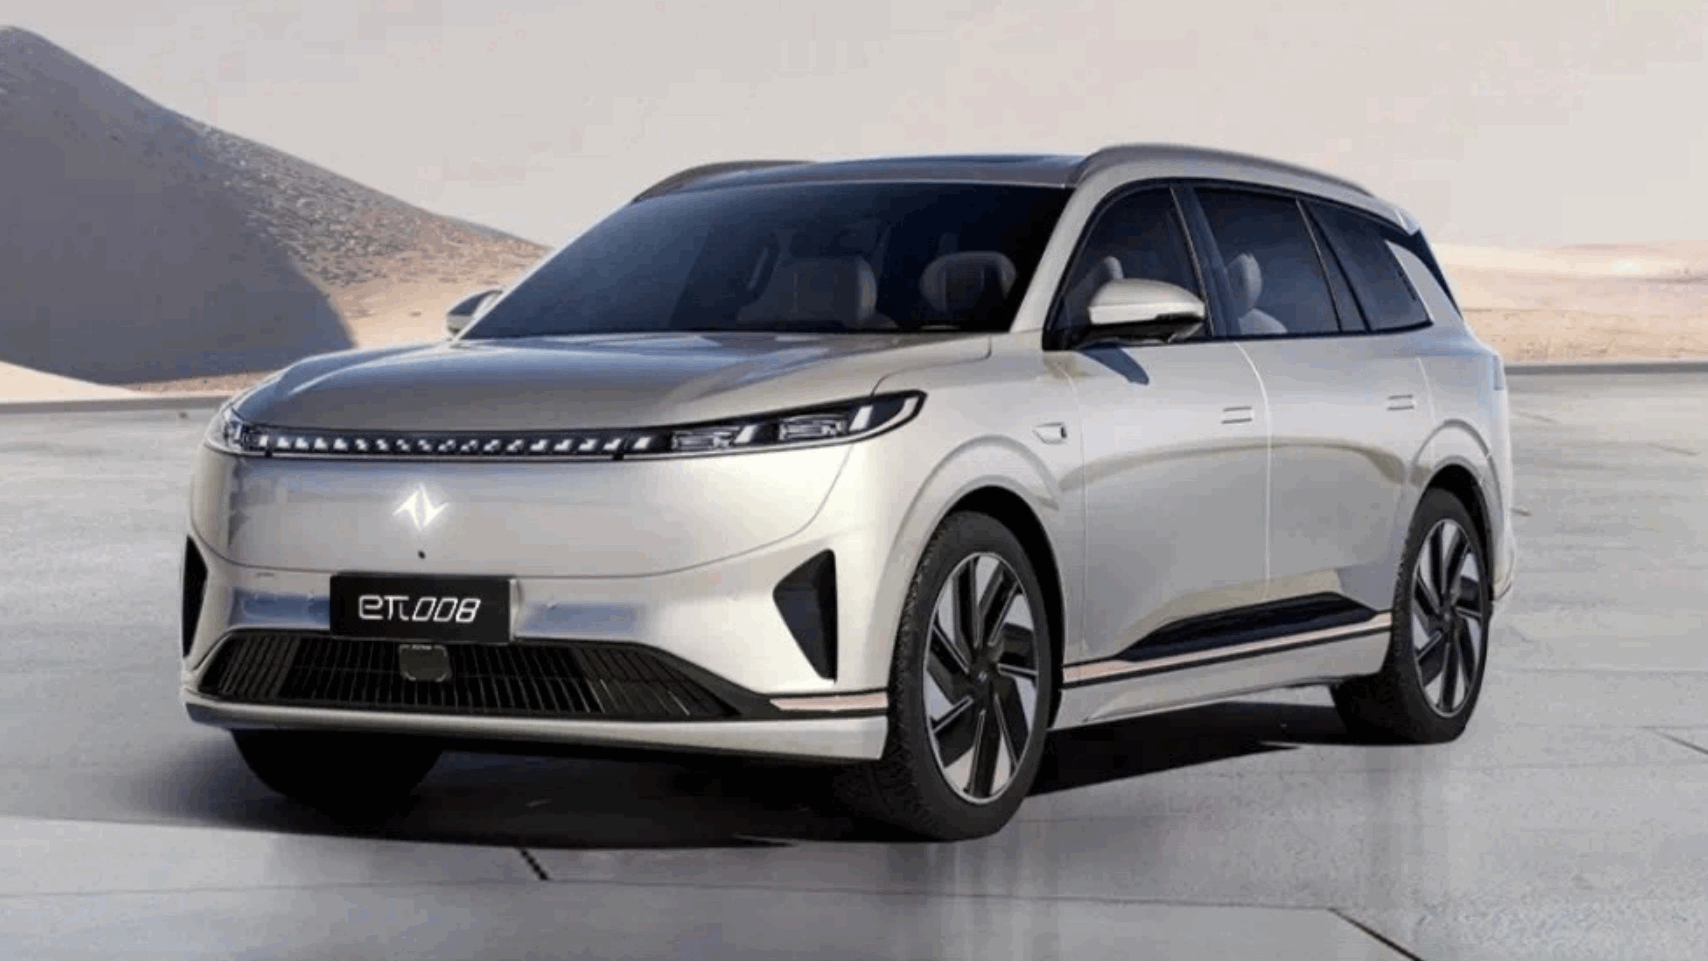 Dongfeng eπ 008 launches in China with the only option being EV or EREV